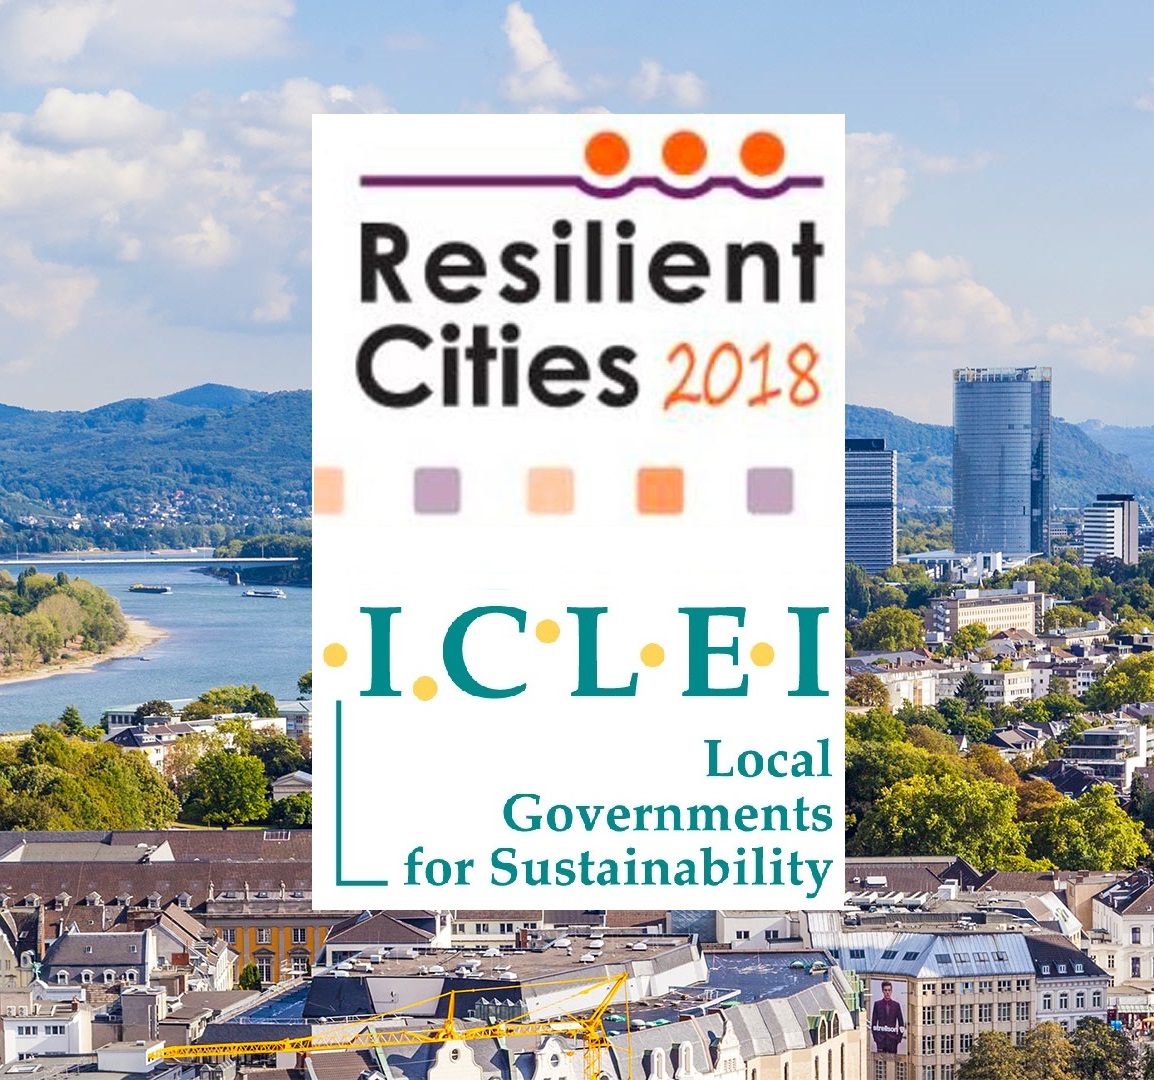 Resilient Cities 2018, ICLEI logos